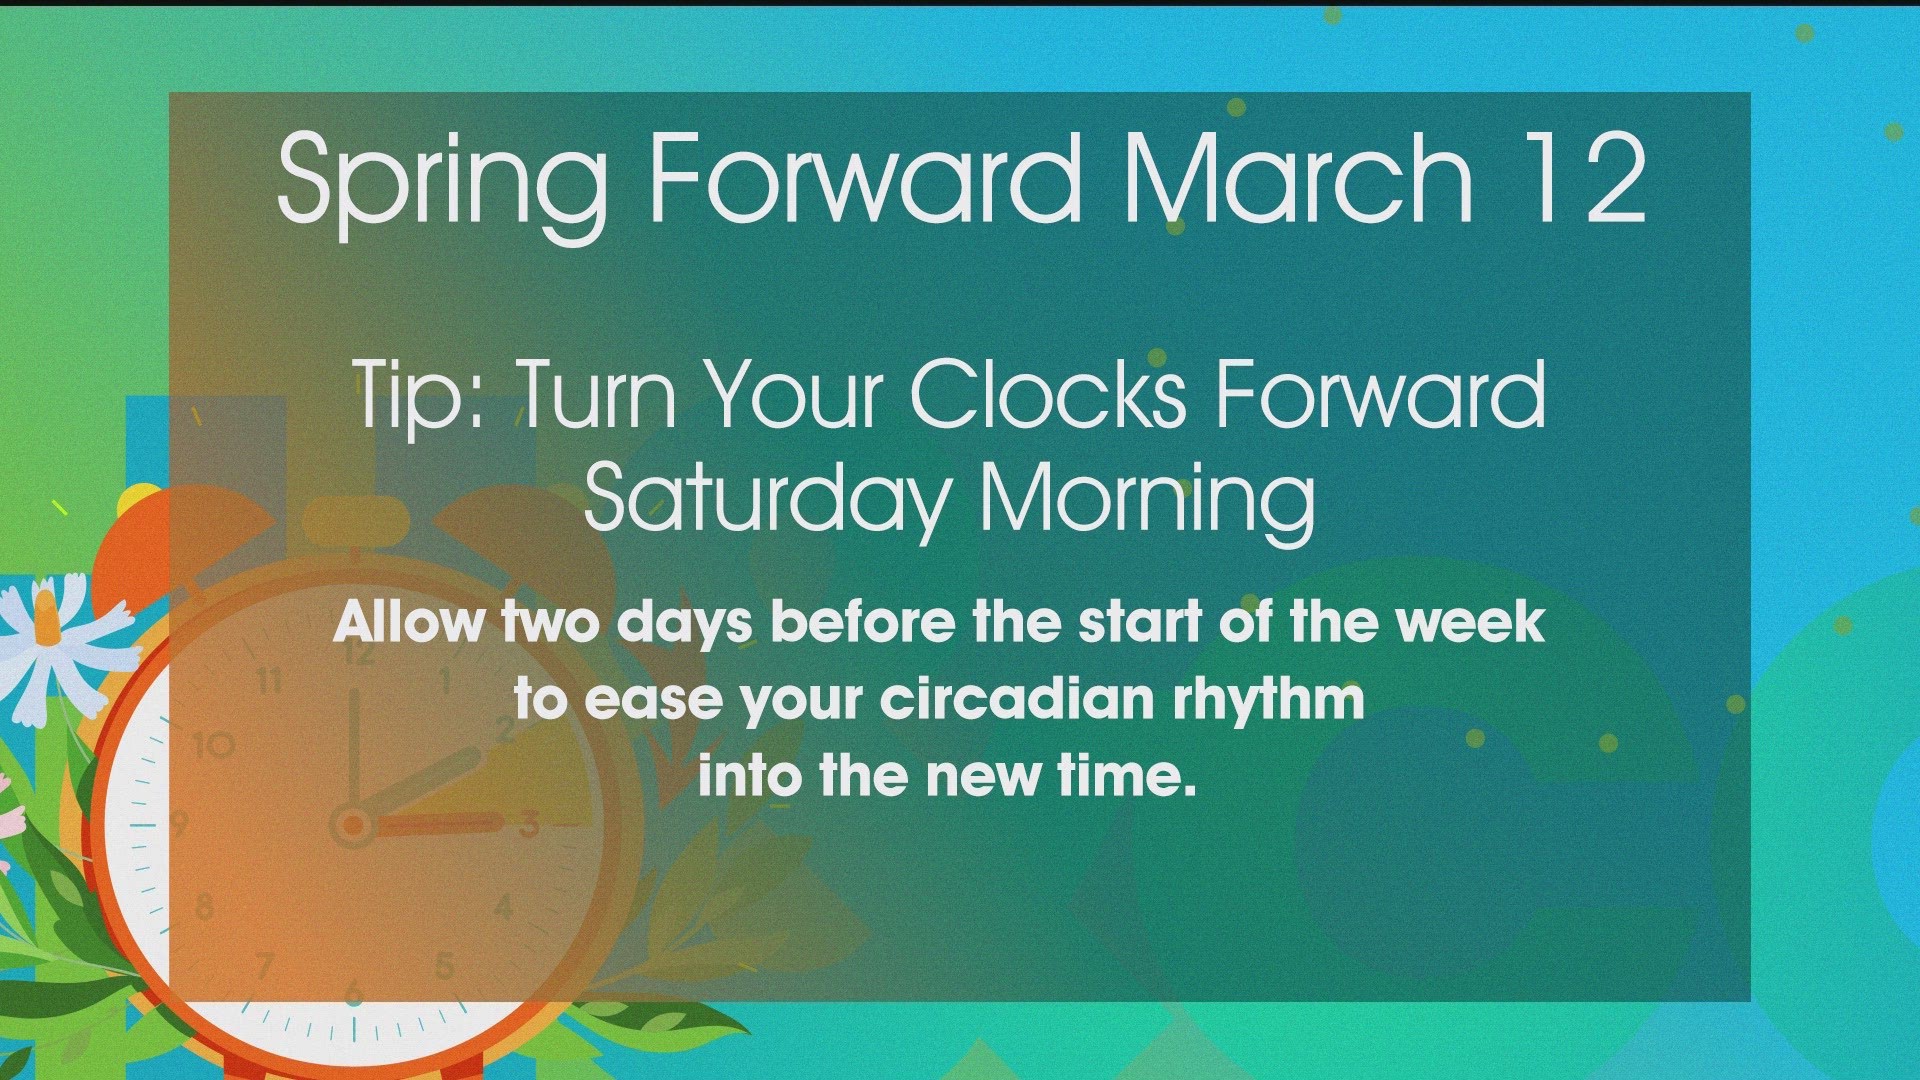 Turn your clocks ahead this weekend as we spring forward and ease into your circadian rhythm with the time change.